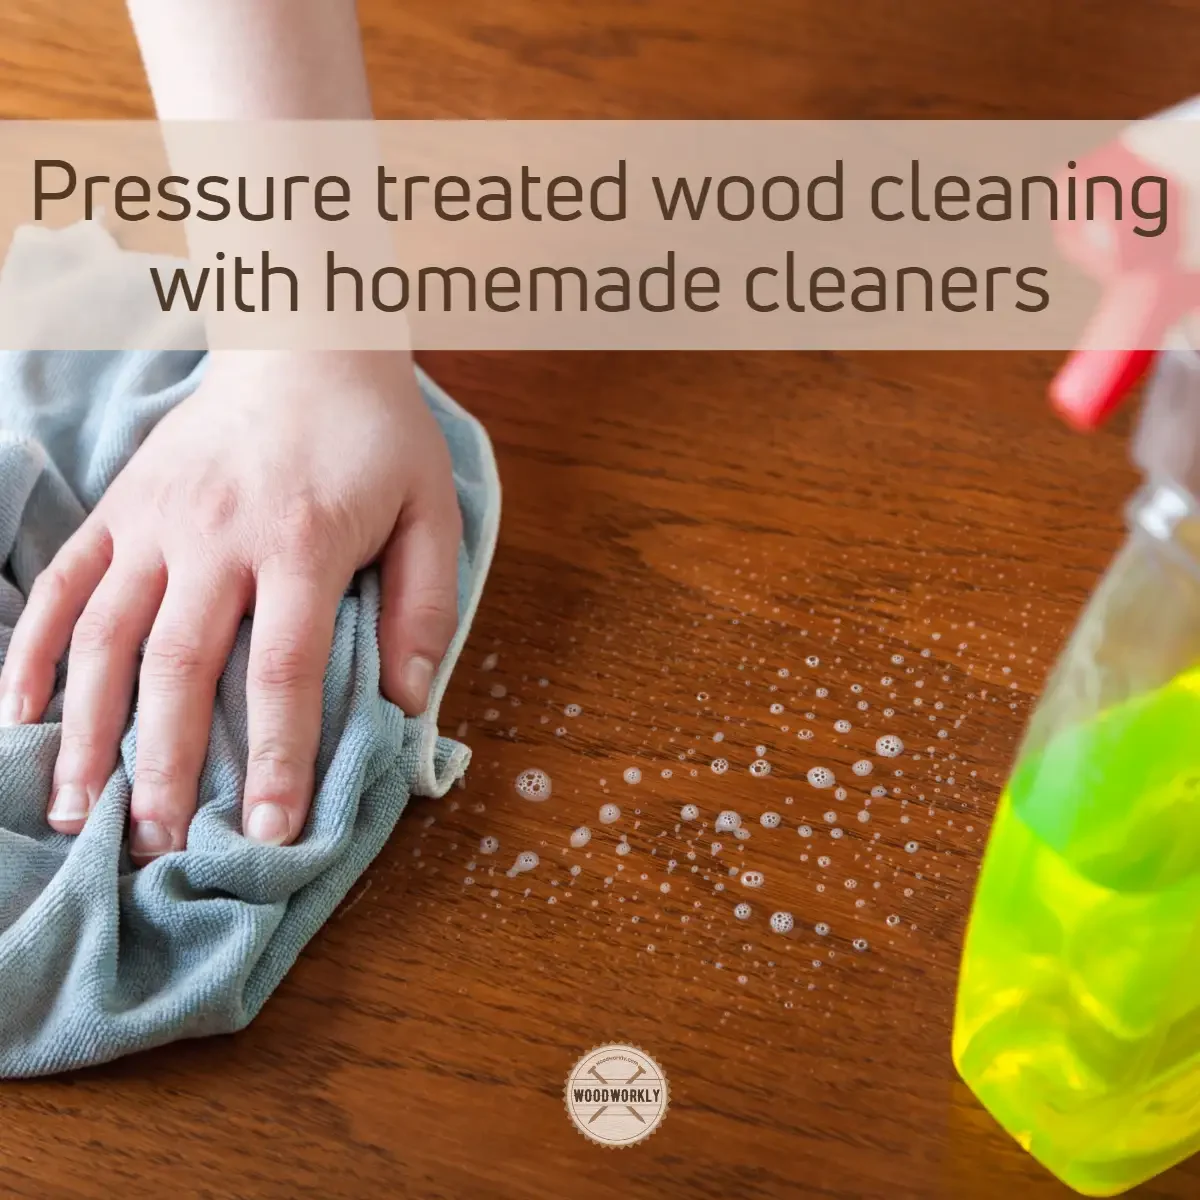 Pressure treated wood cleaning with homemade cleaners